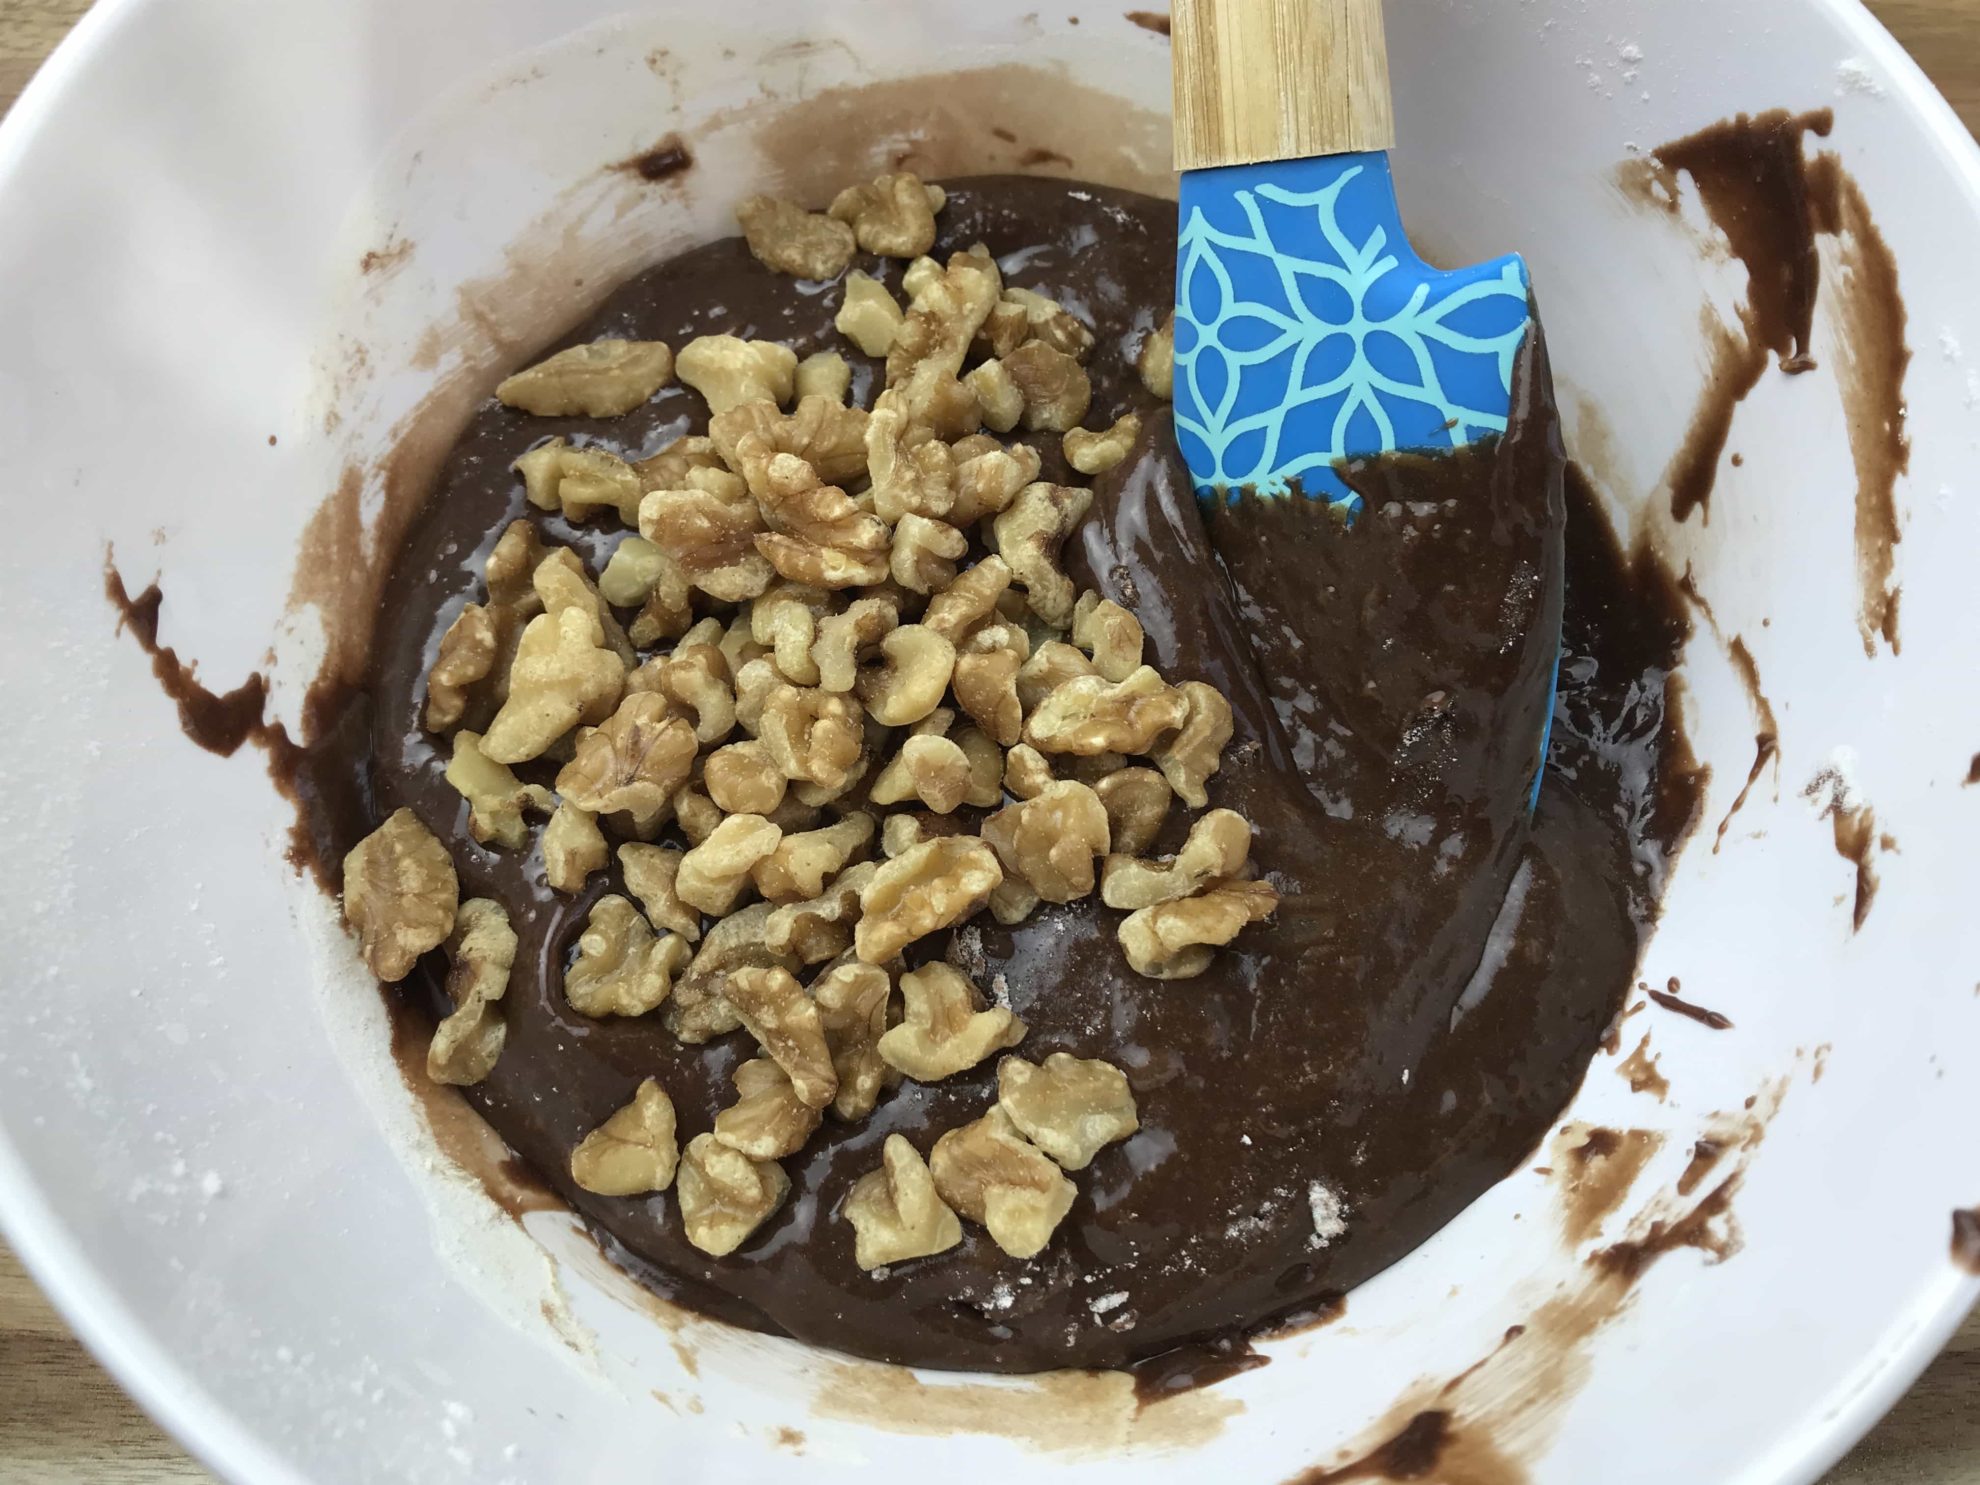 Walnut pieces spread over brownie batter with blue spatula